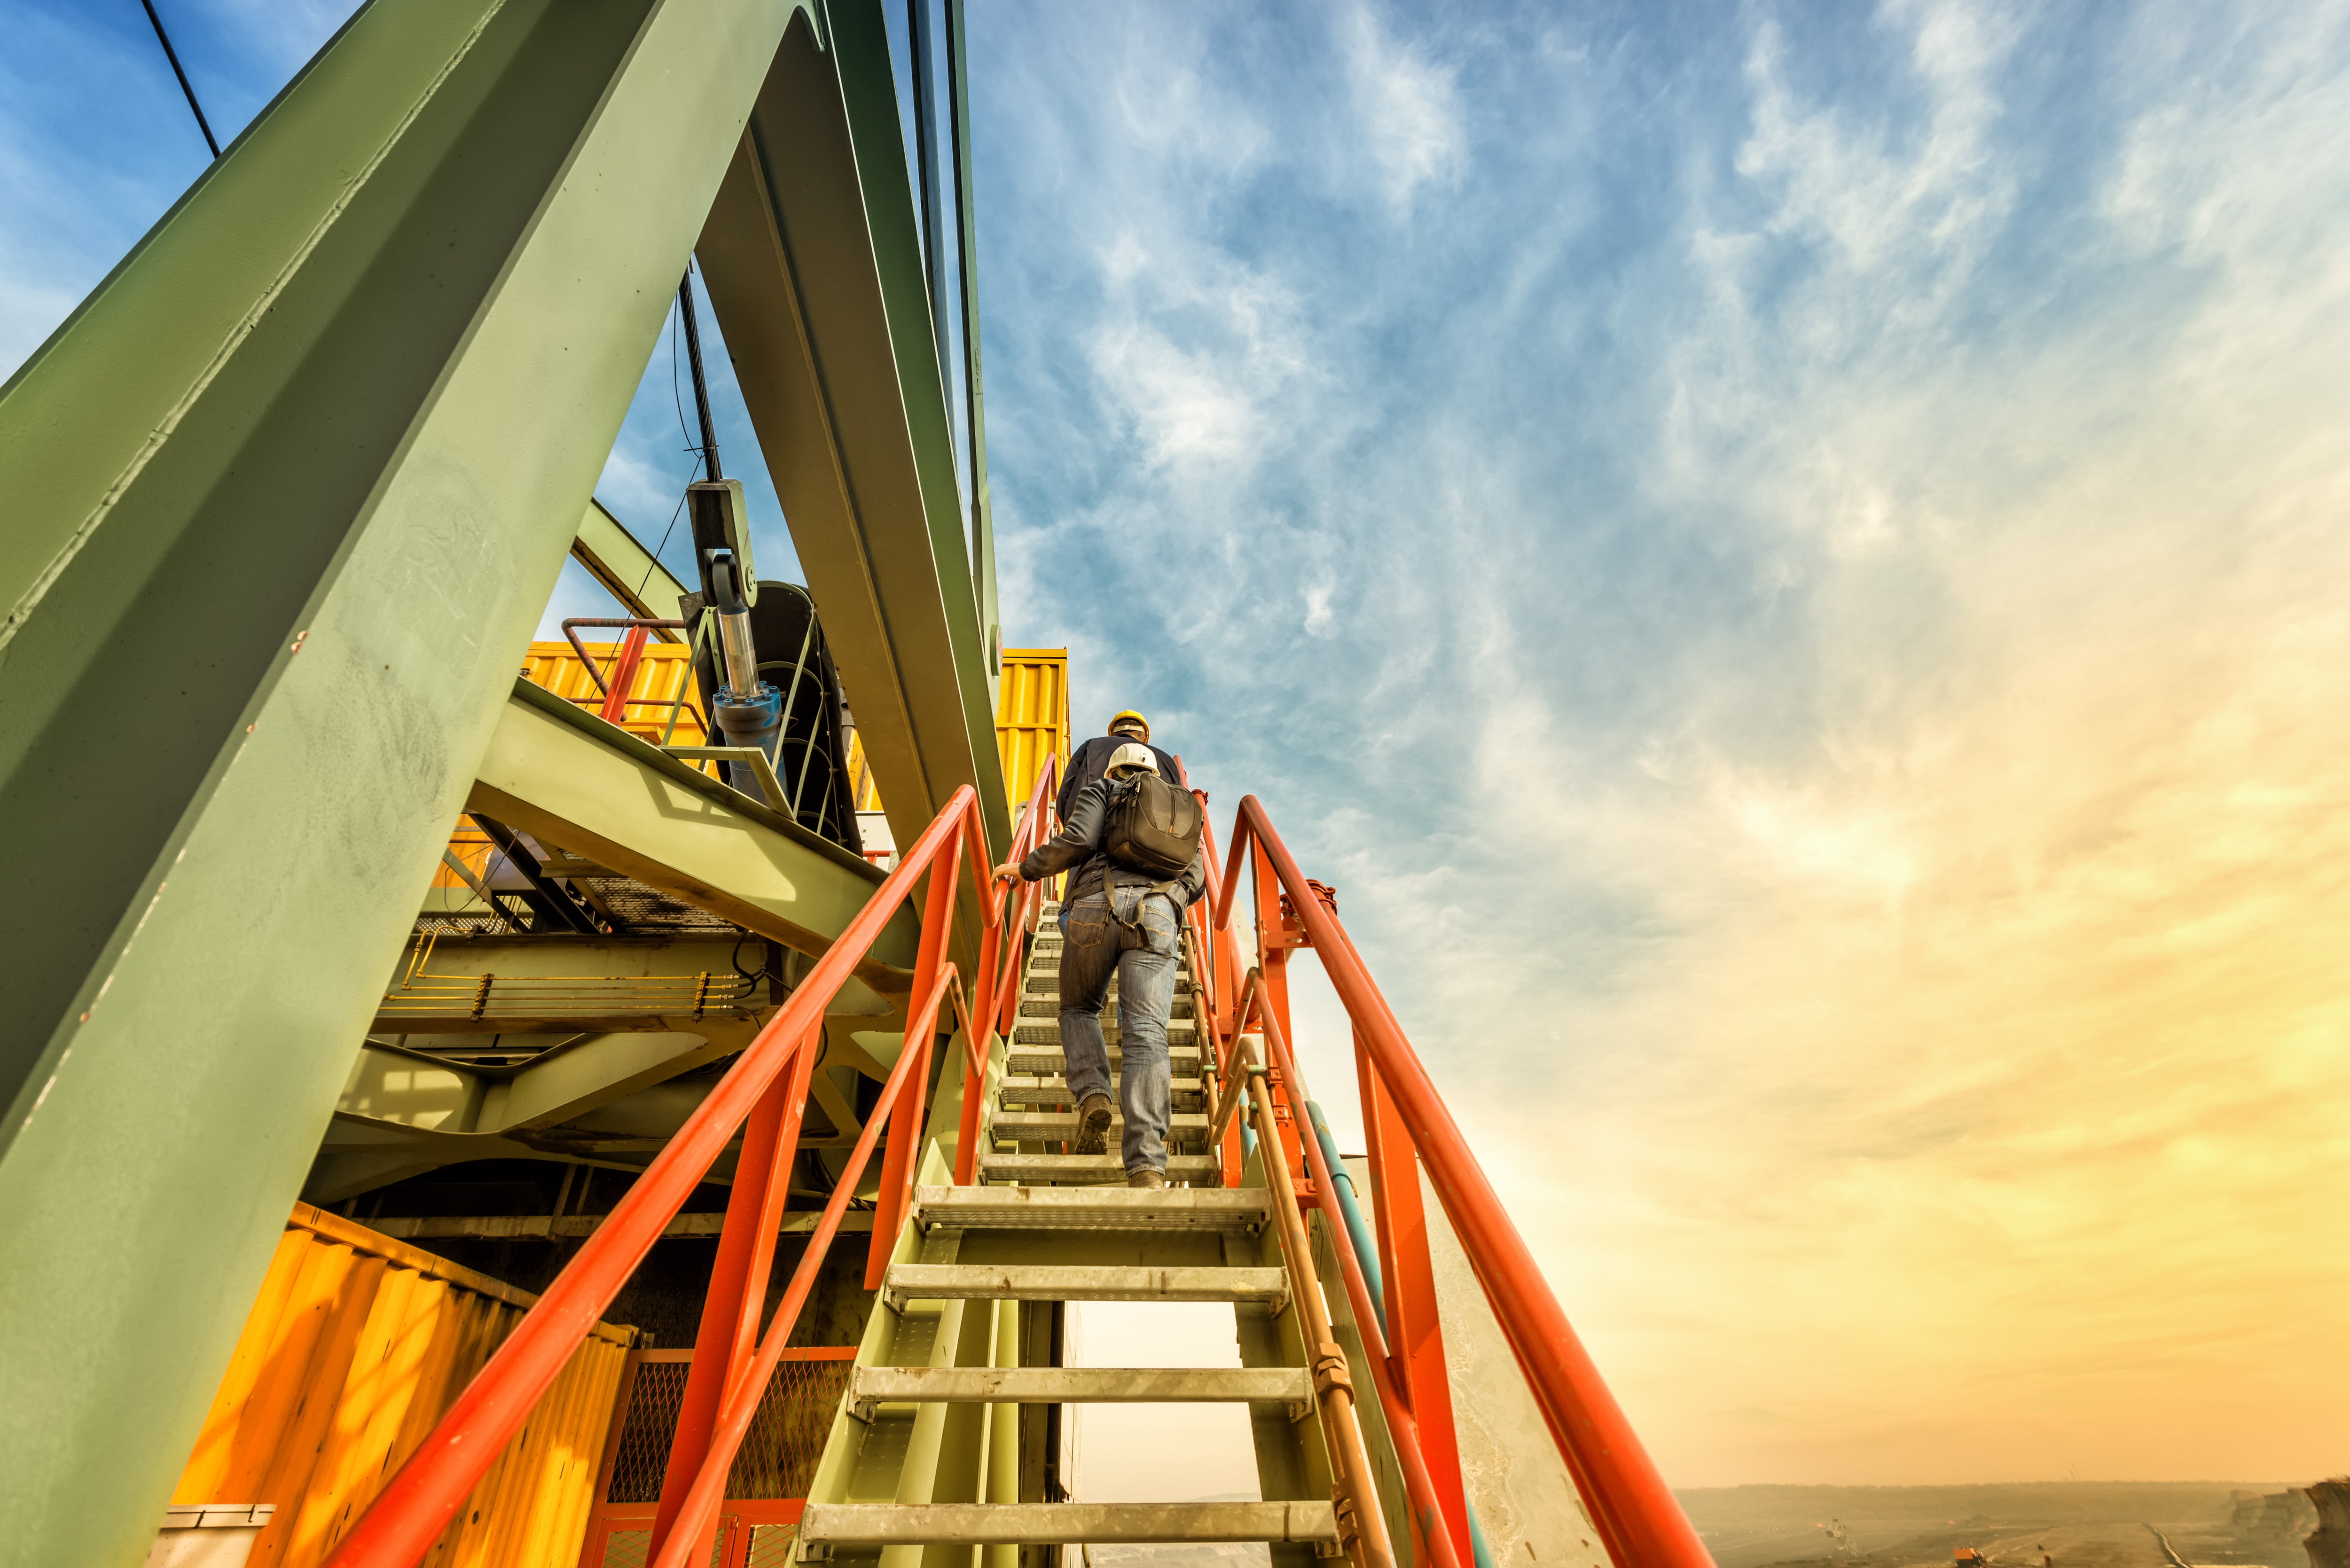 Two coal mine engineers are climbing on the steep stairs to the highest part of the huge coal digger machine. Beautiful and colorful sky in the background